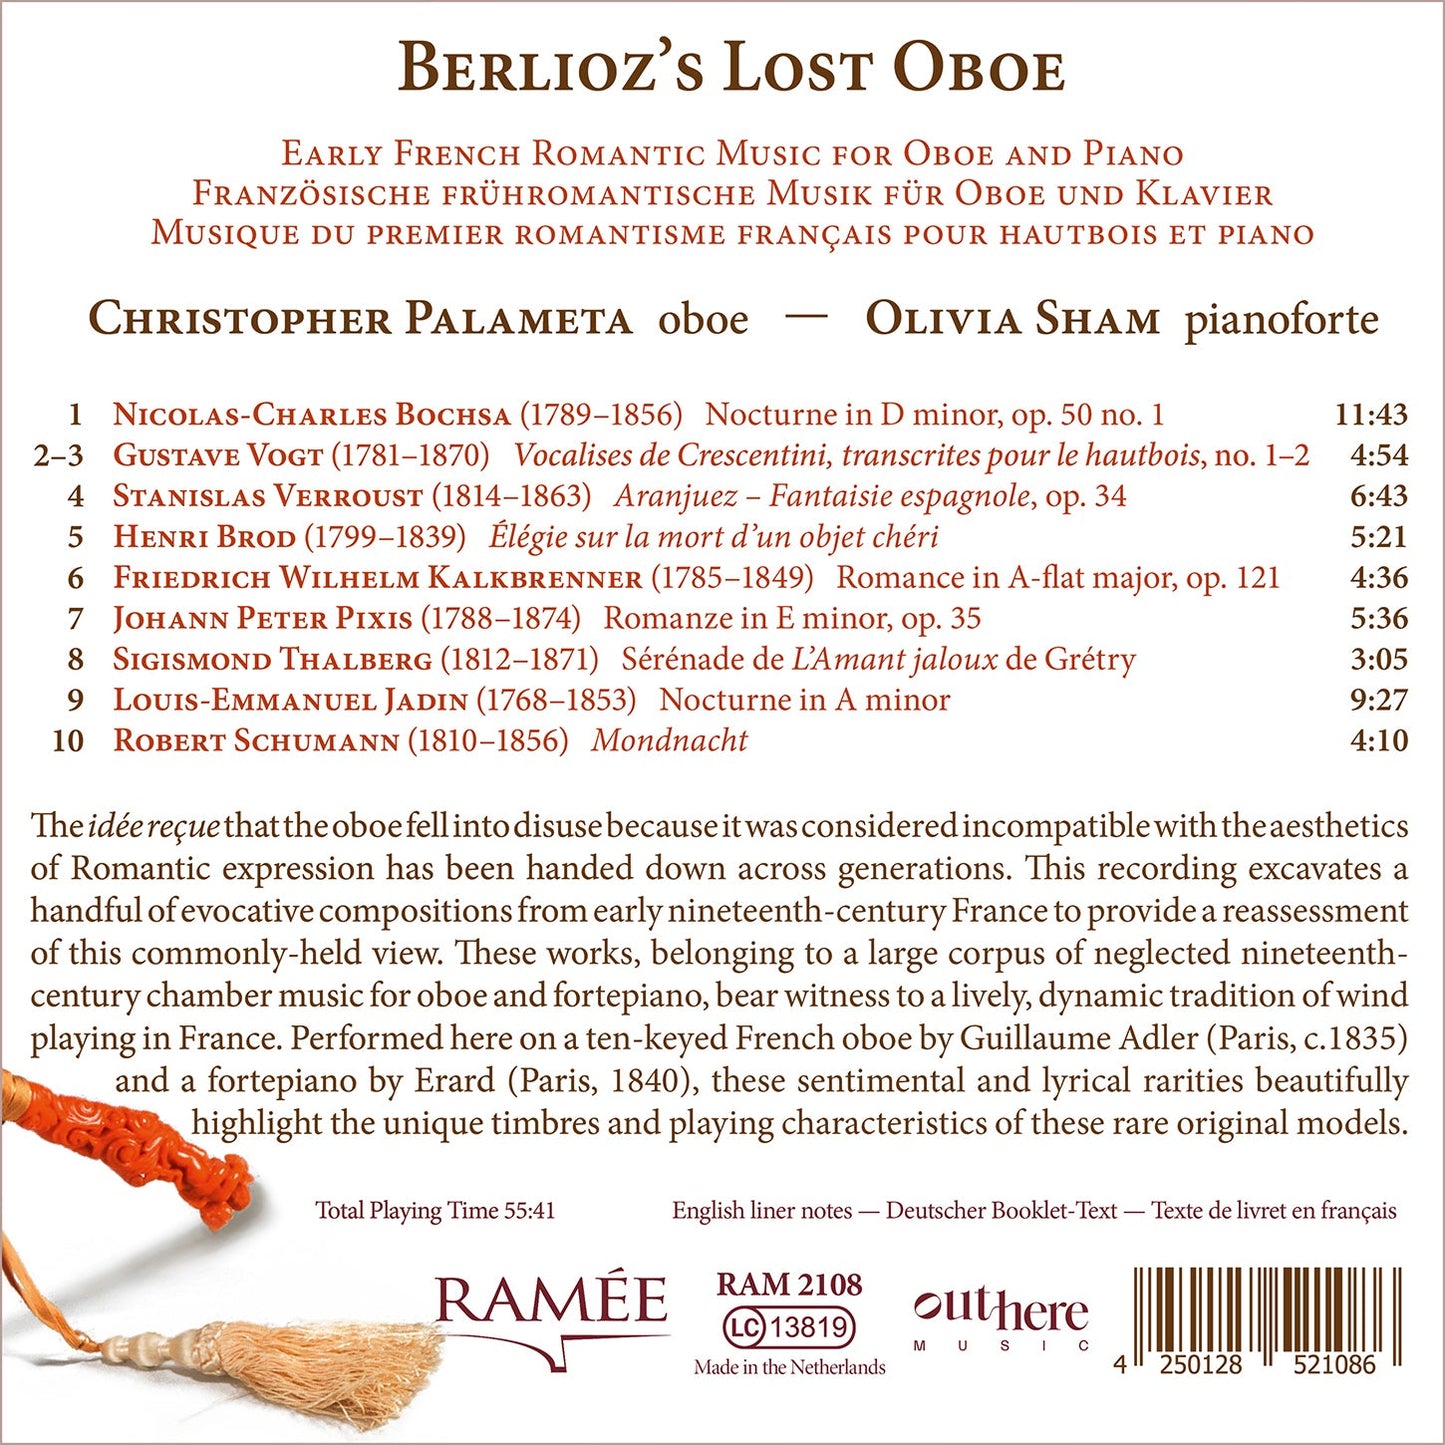 Berlioz's Lost Oboe - Early French Romantic Music For Oboe &